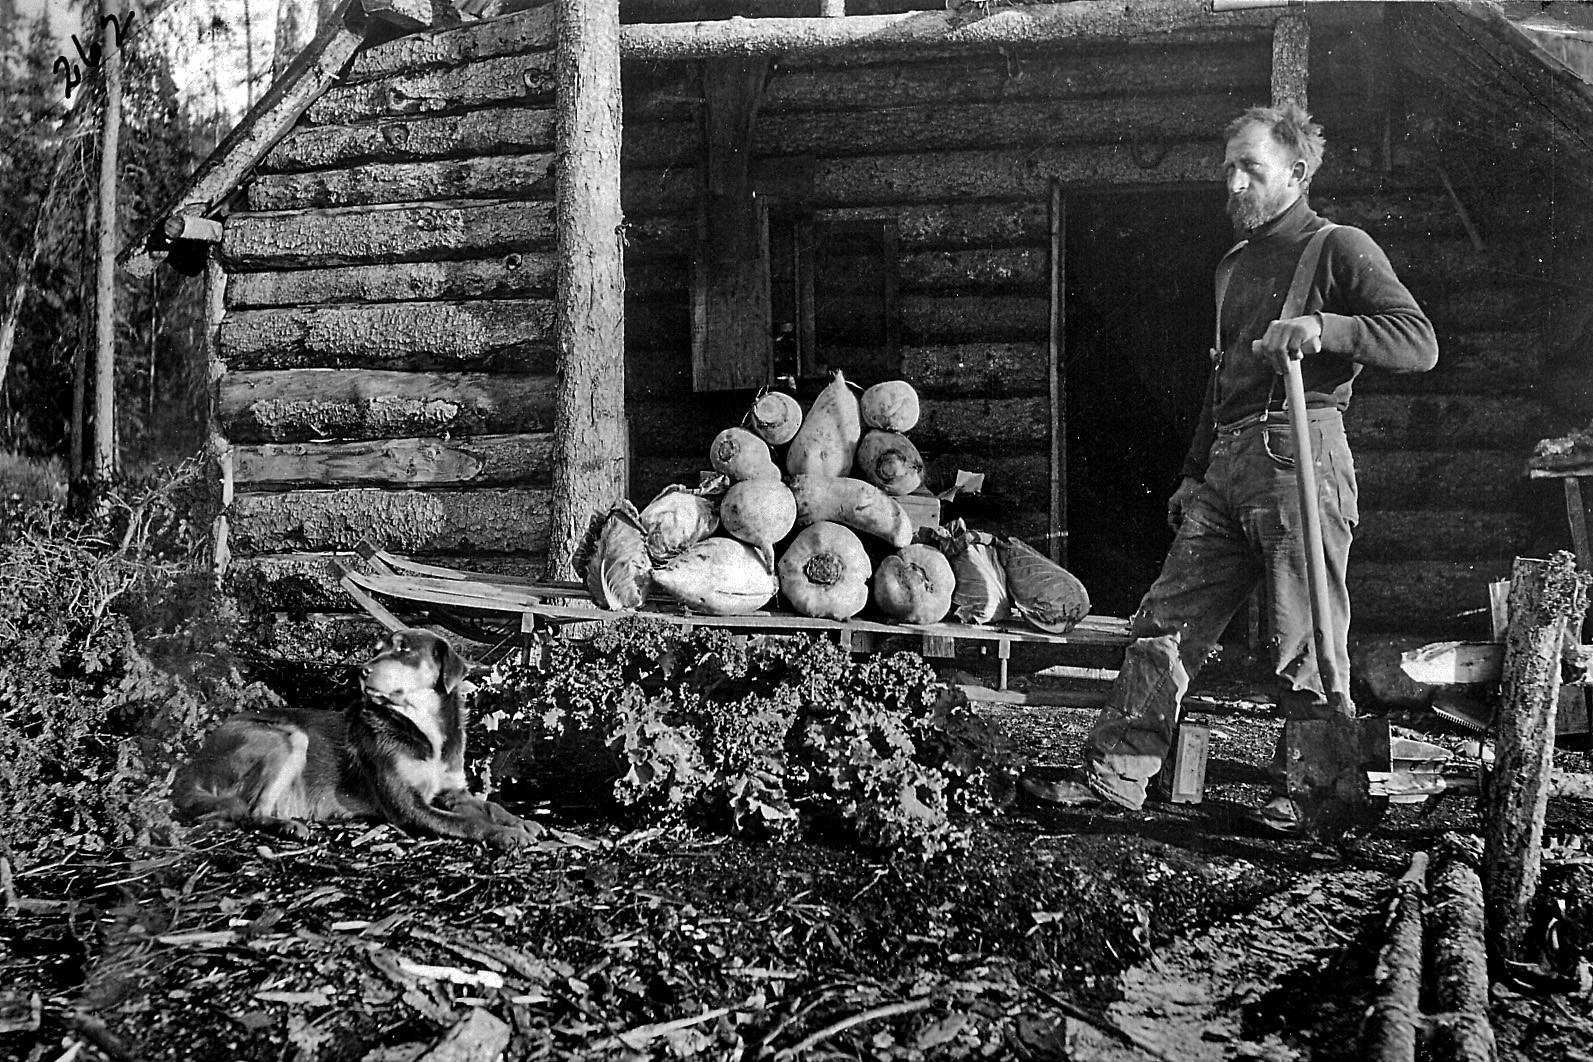 Herman Stelter at his home on Kenai R, circa 1910s--Herman Stelter, one of the few members of the Kings County Mining Company to remain in or return to Alaska, poses here with a big crop of vegetables by his home near the Kenai River canyon. (U.S. Forest Service photo)